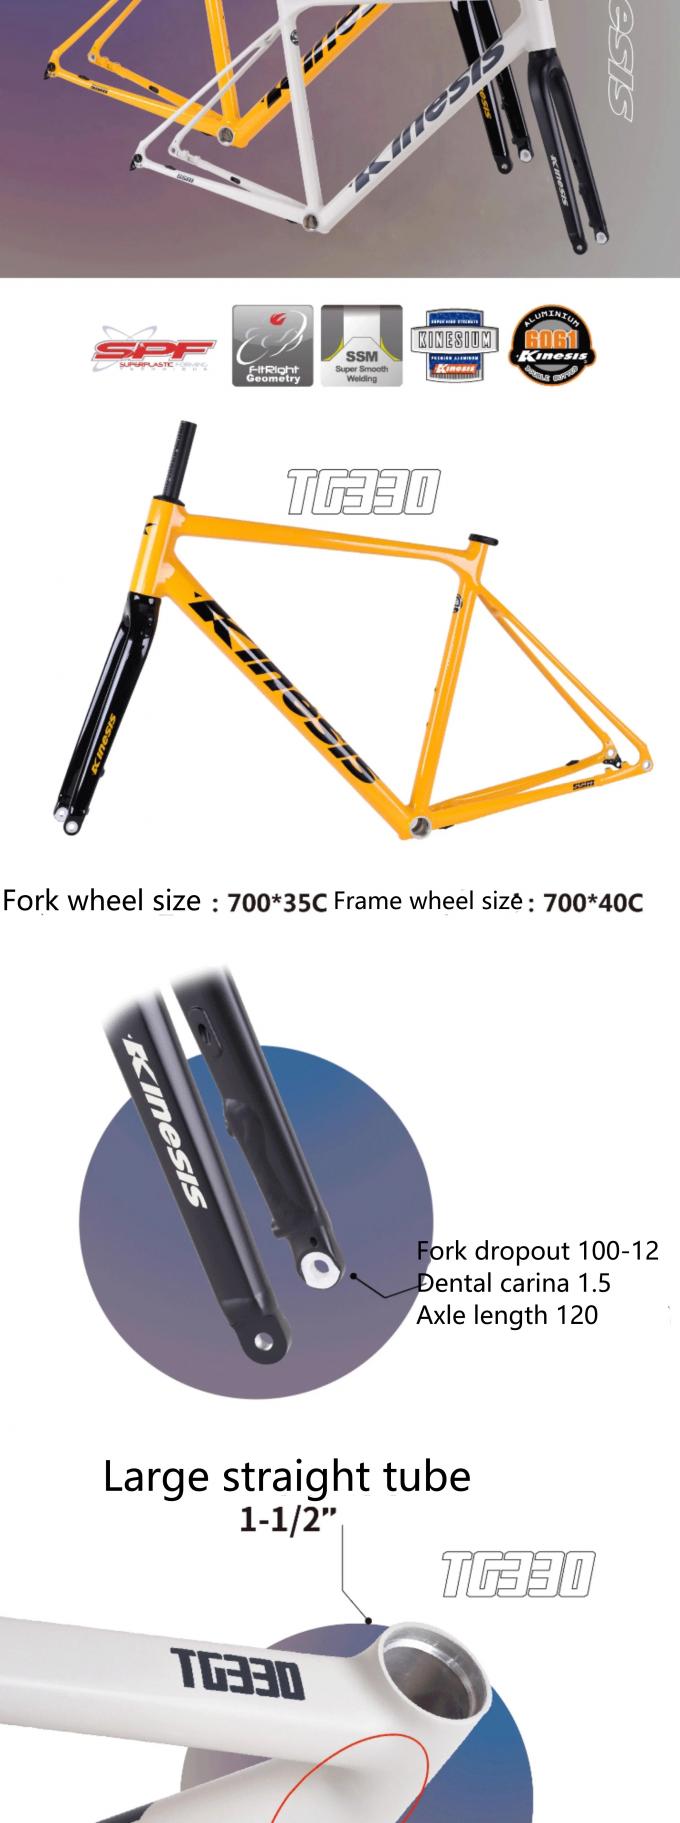 700x38c Gravel Bike Frame with Tapered Headtube 1-1/8 quot upper 1-1/2 quot lower 4